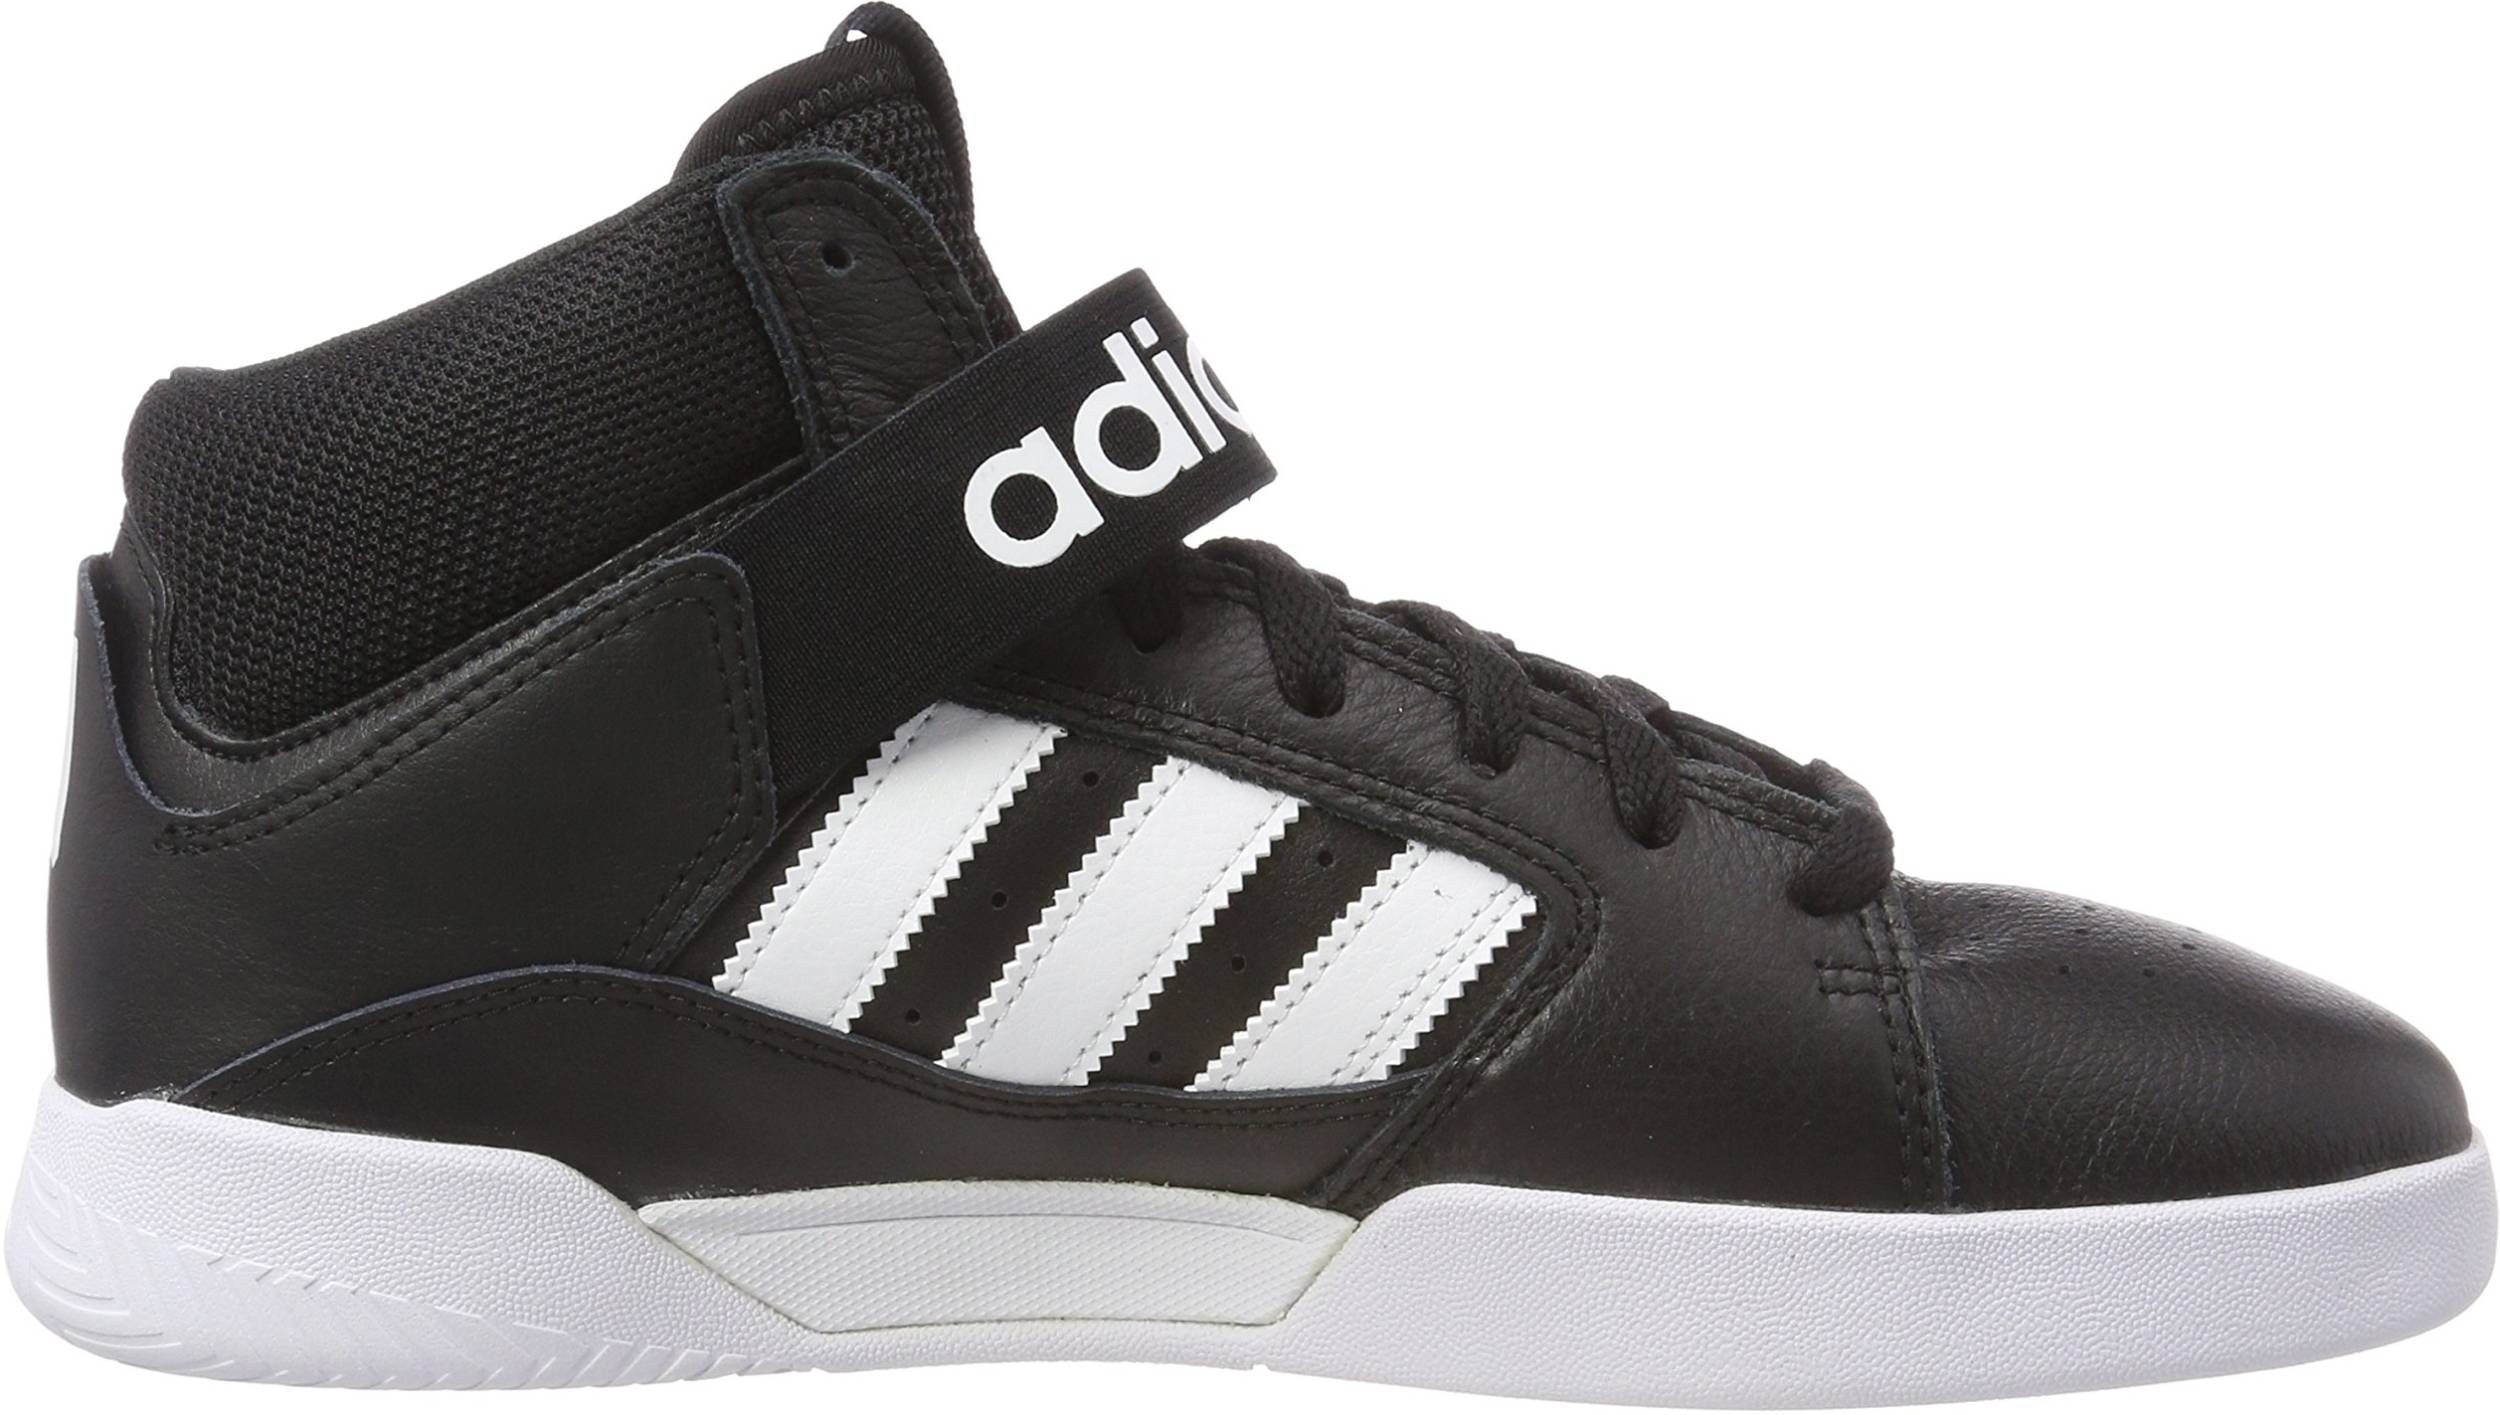 Adidas VRX Cup Mid deals in black 